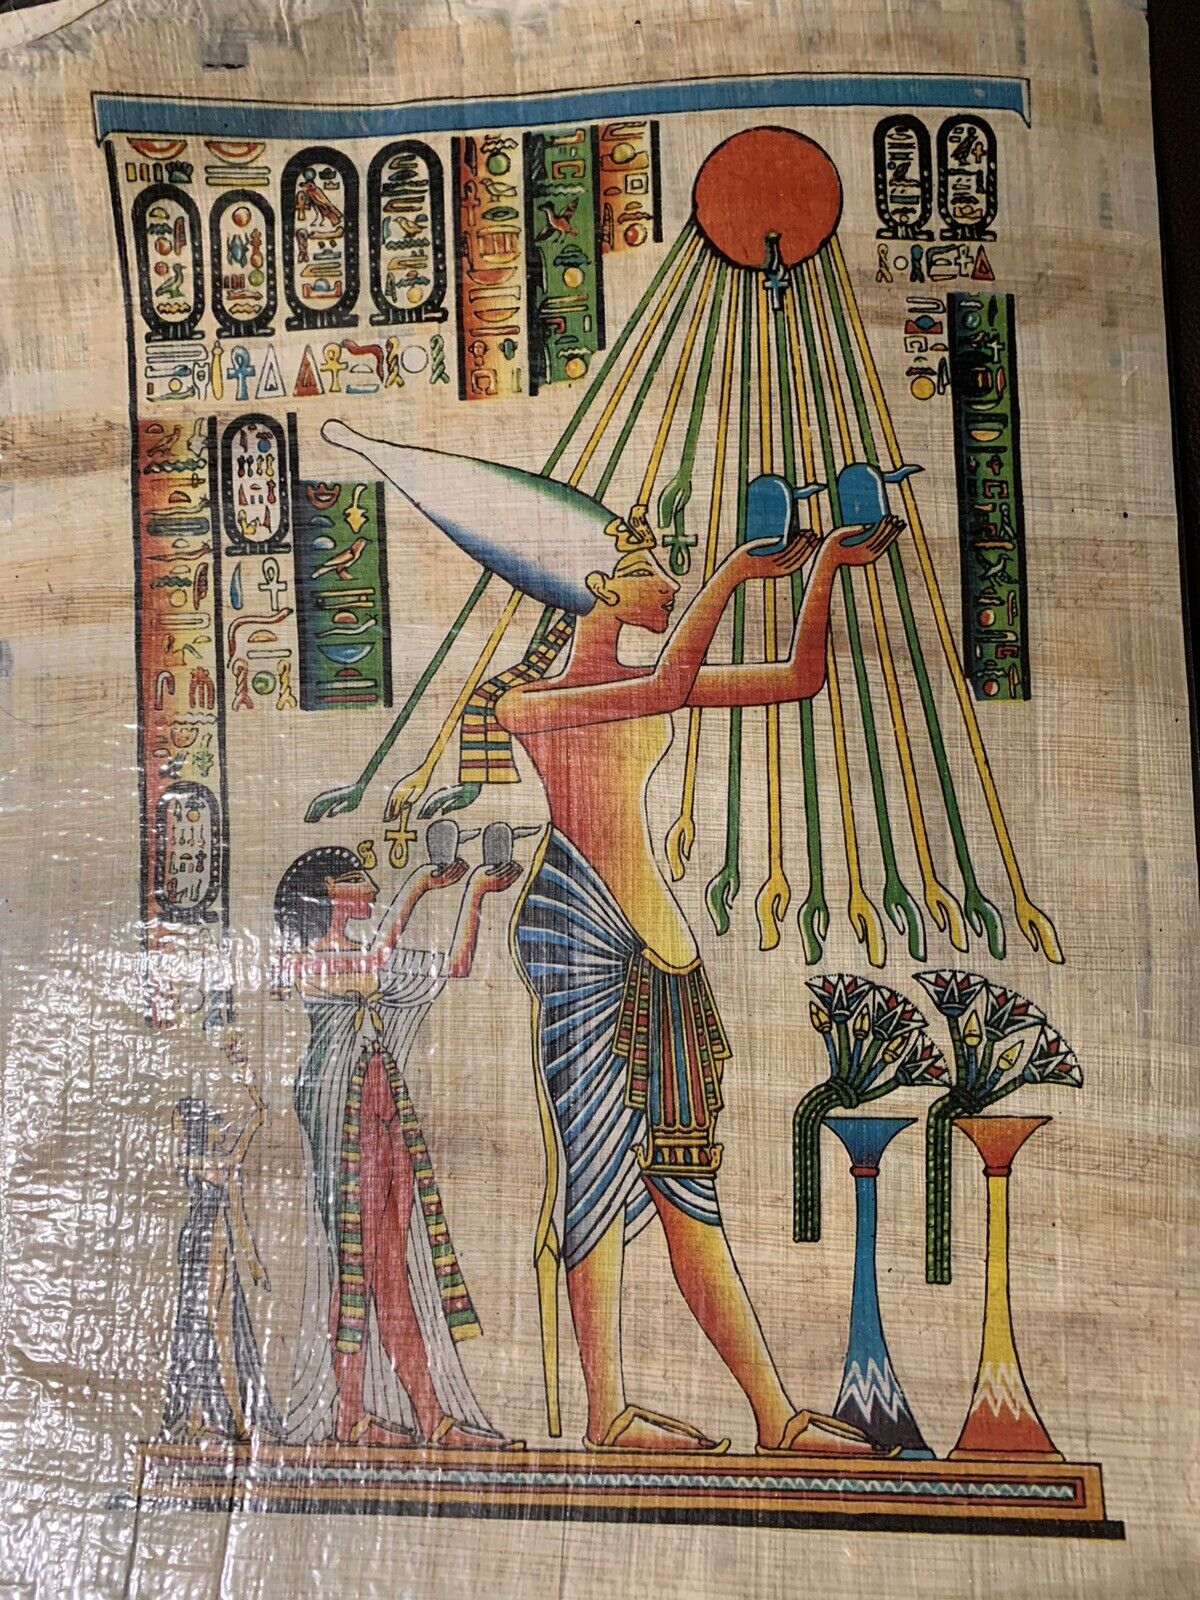 Egyptian Manuscripts : Egyptian Papyrus Paper With Pharaonic Print on it